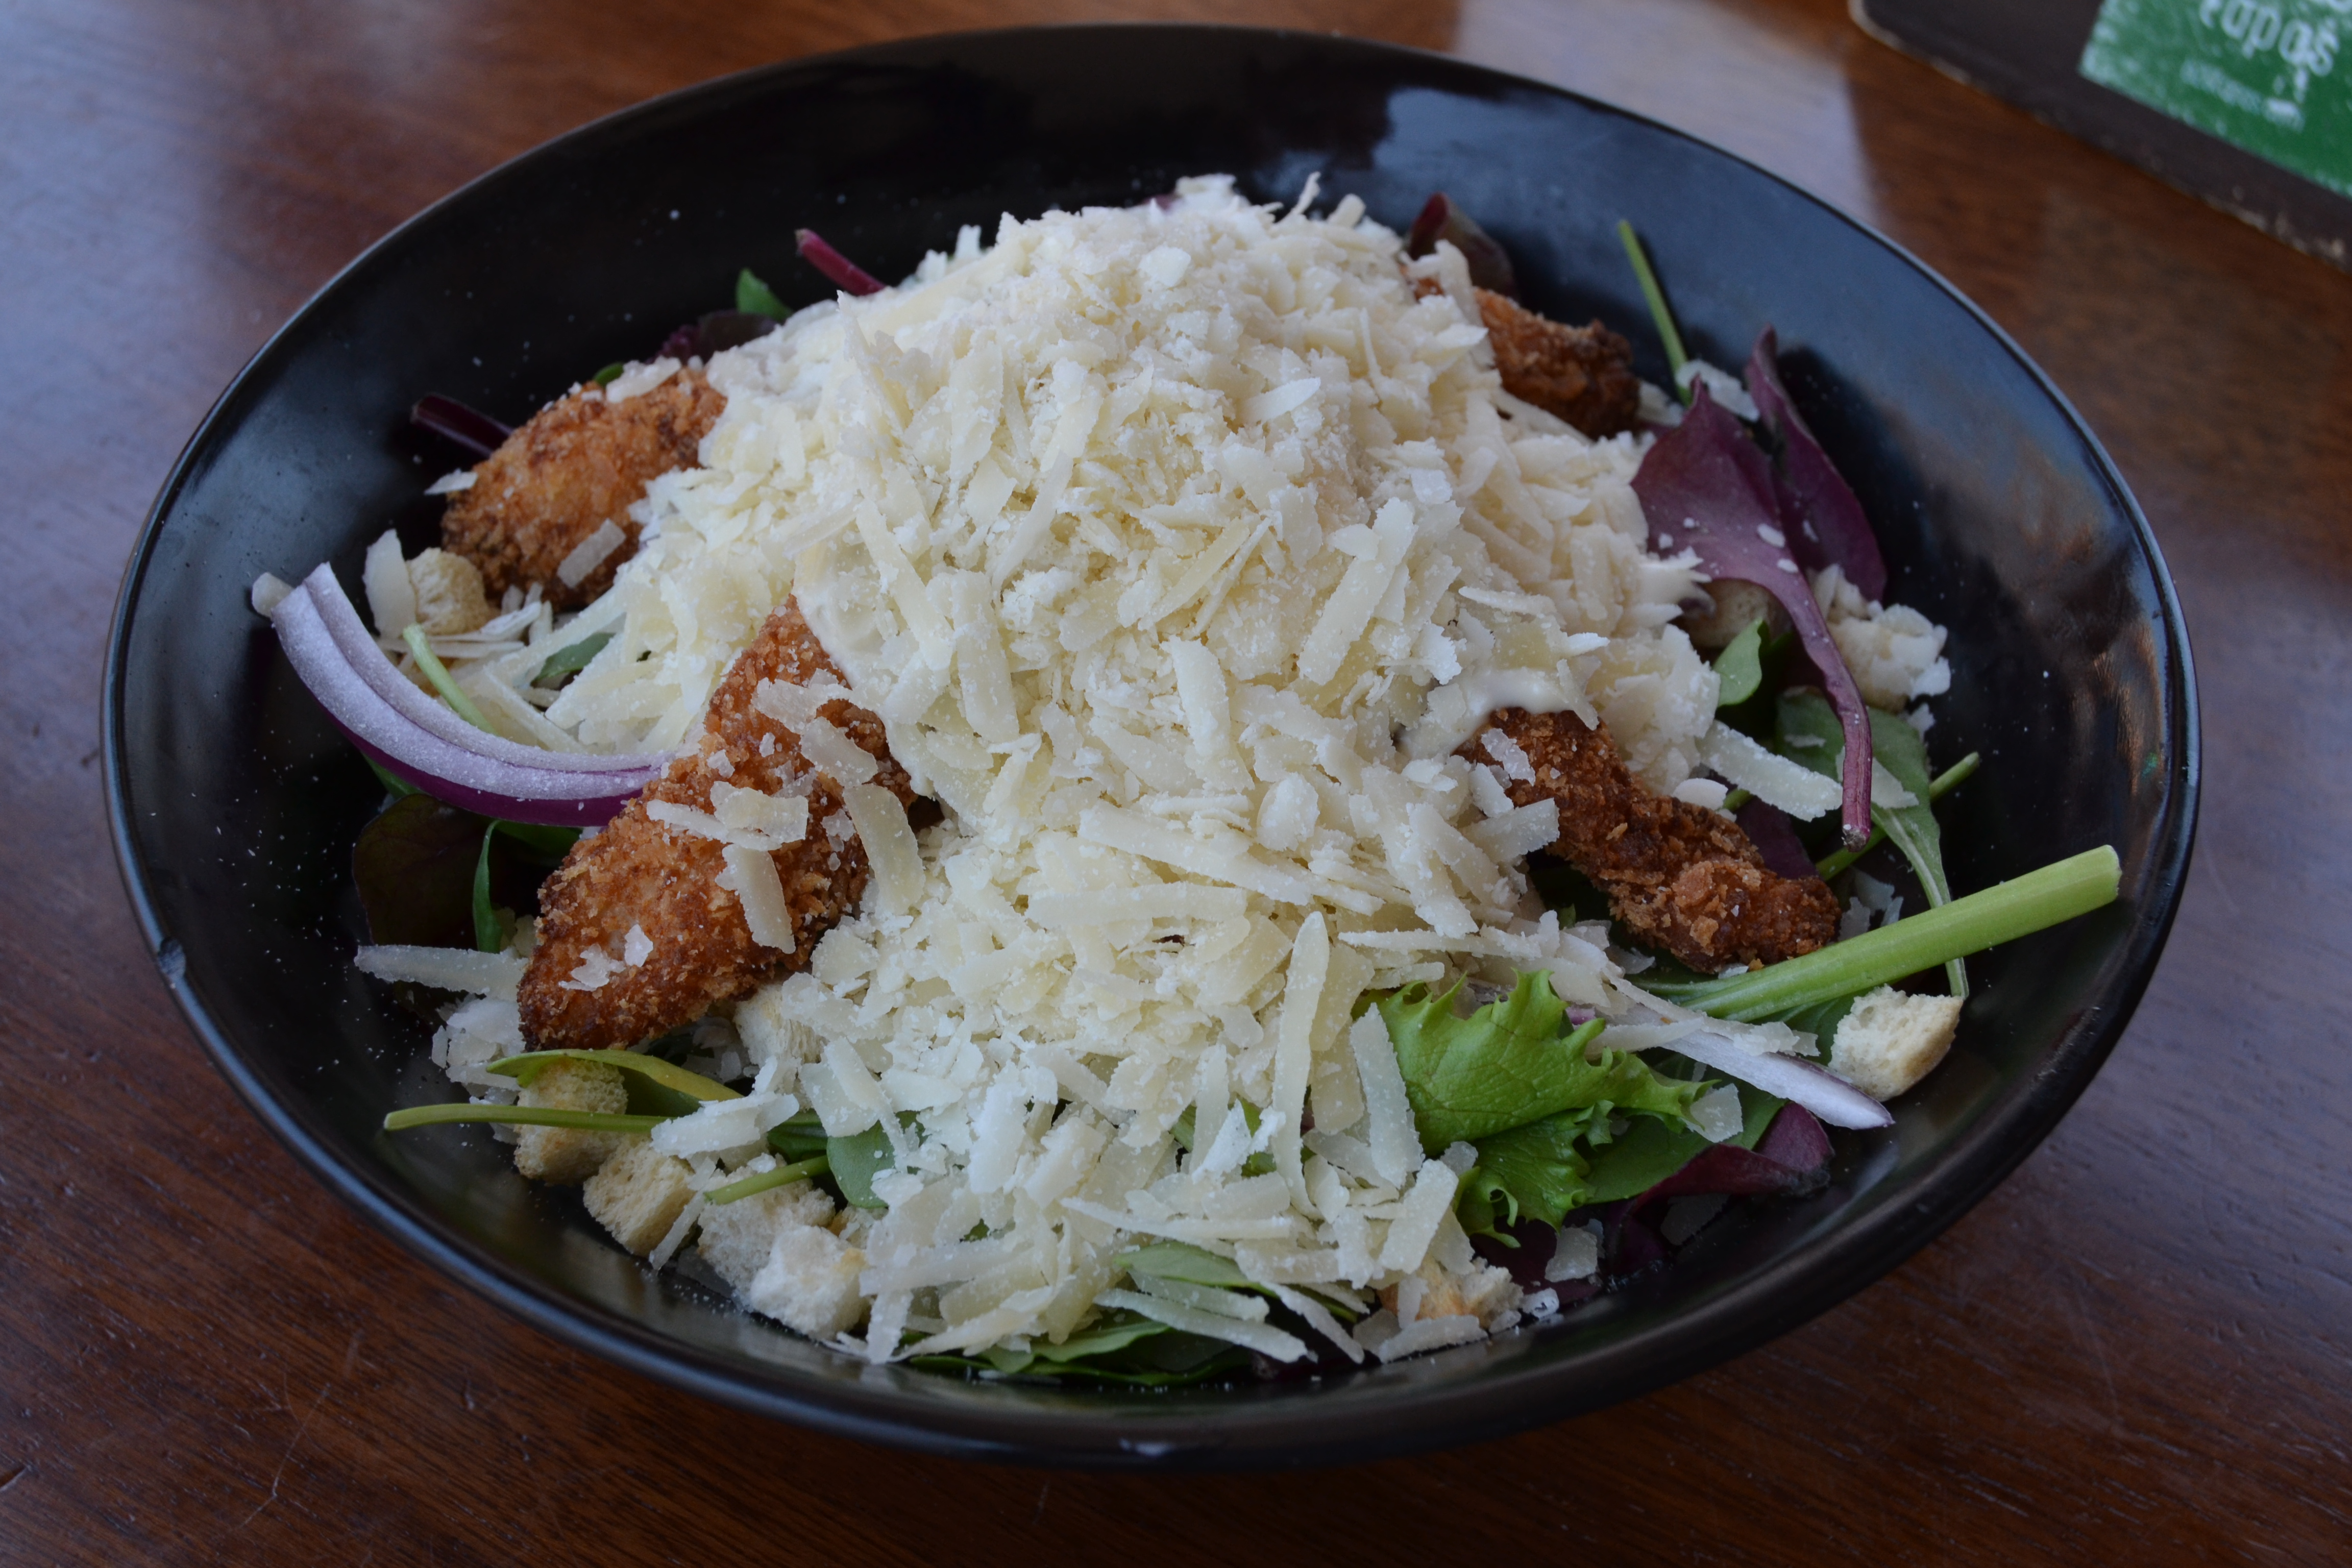 CAESAR SALAD WITH CRISPY CHICKEN AND GRATED PARMESAN